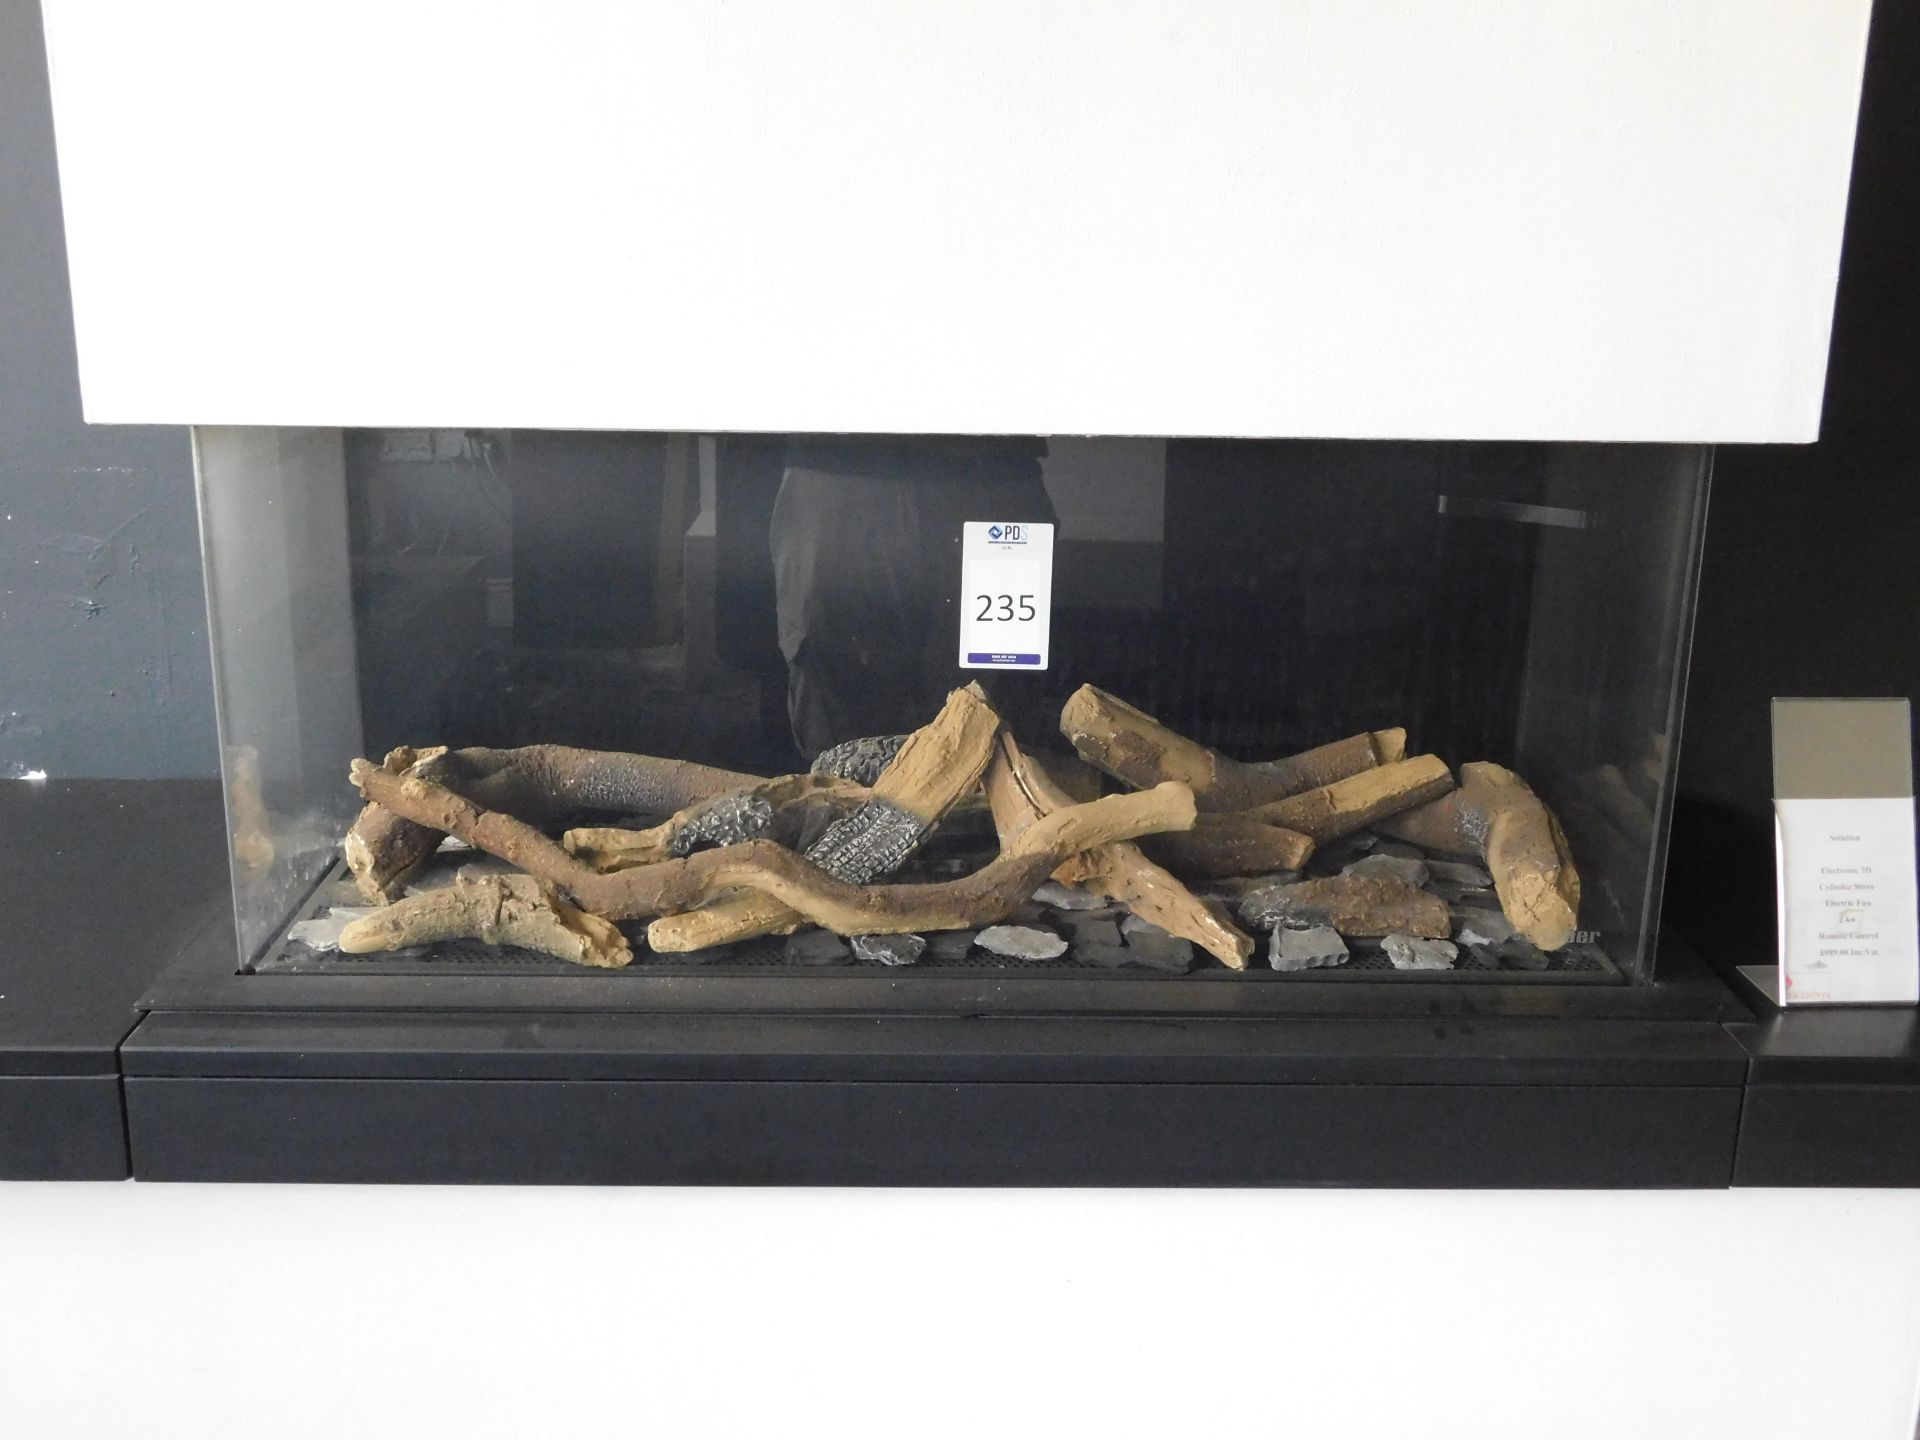 Ex-Display Log Effect Fire (Where the company’s description/price information is shown in the